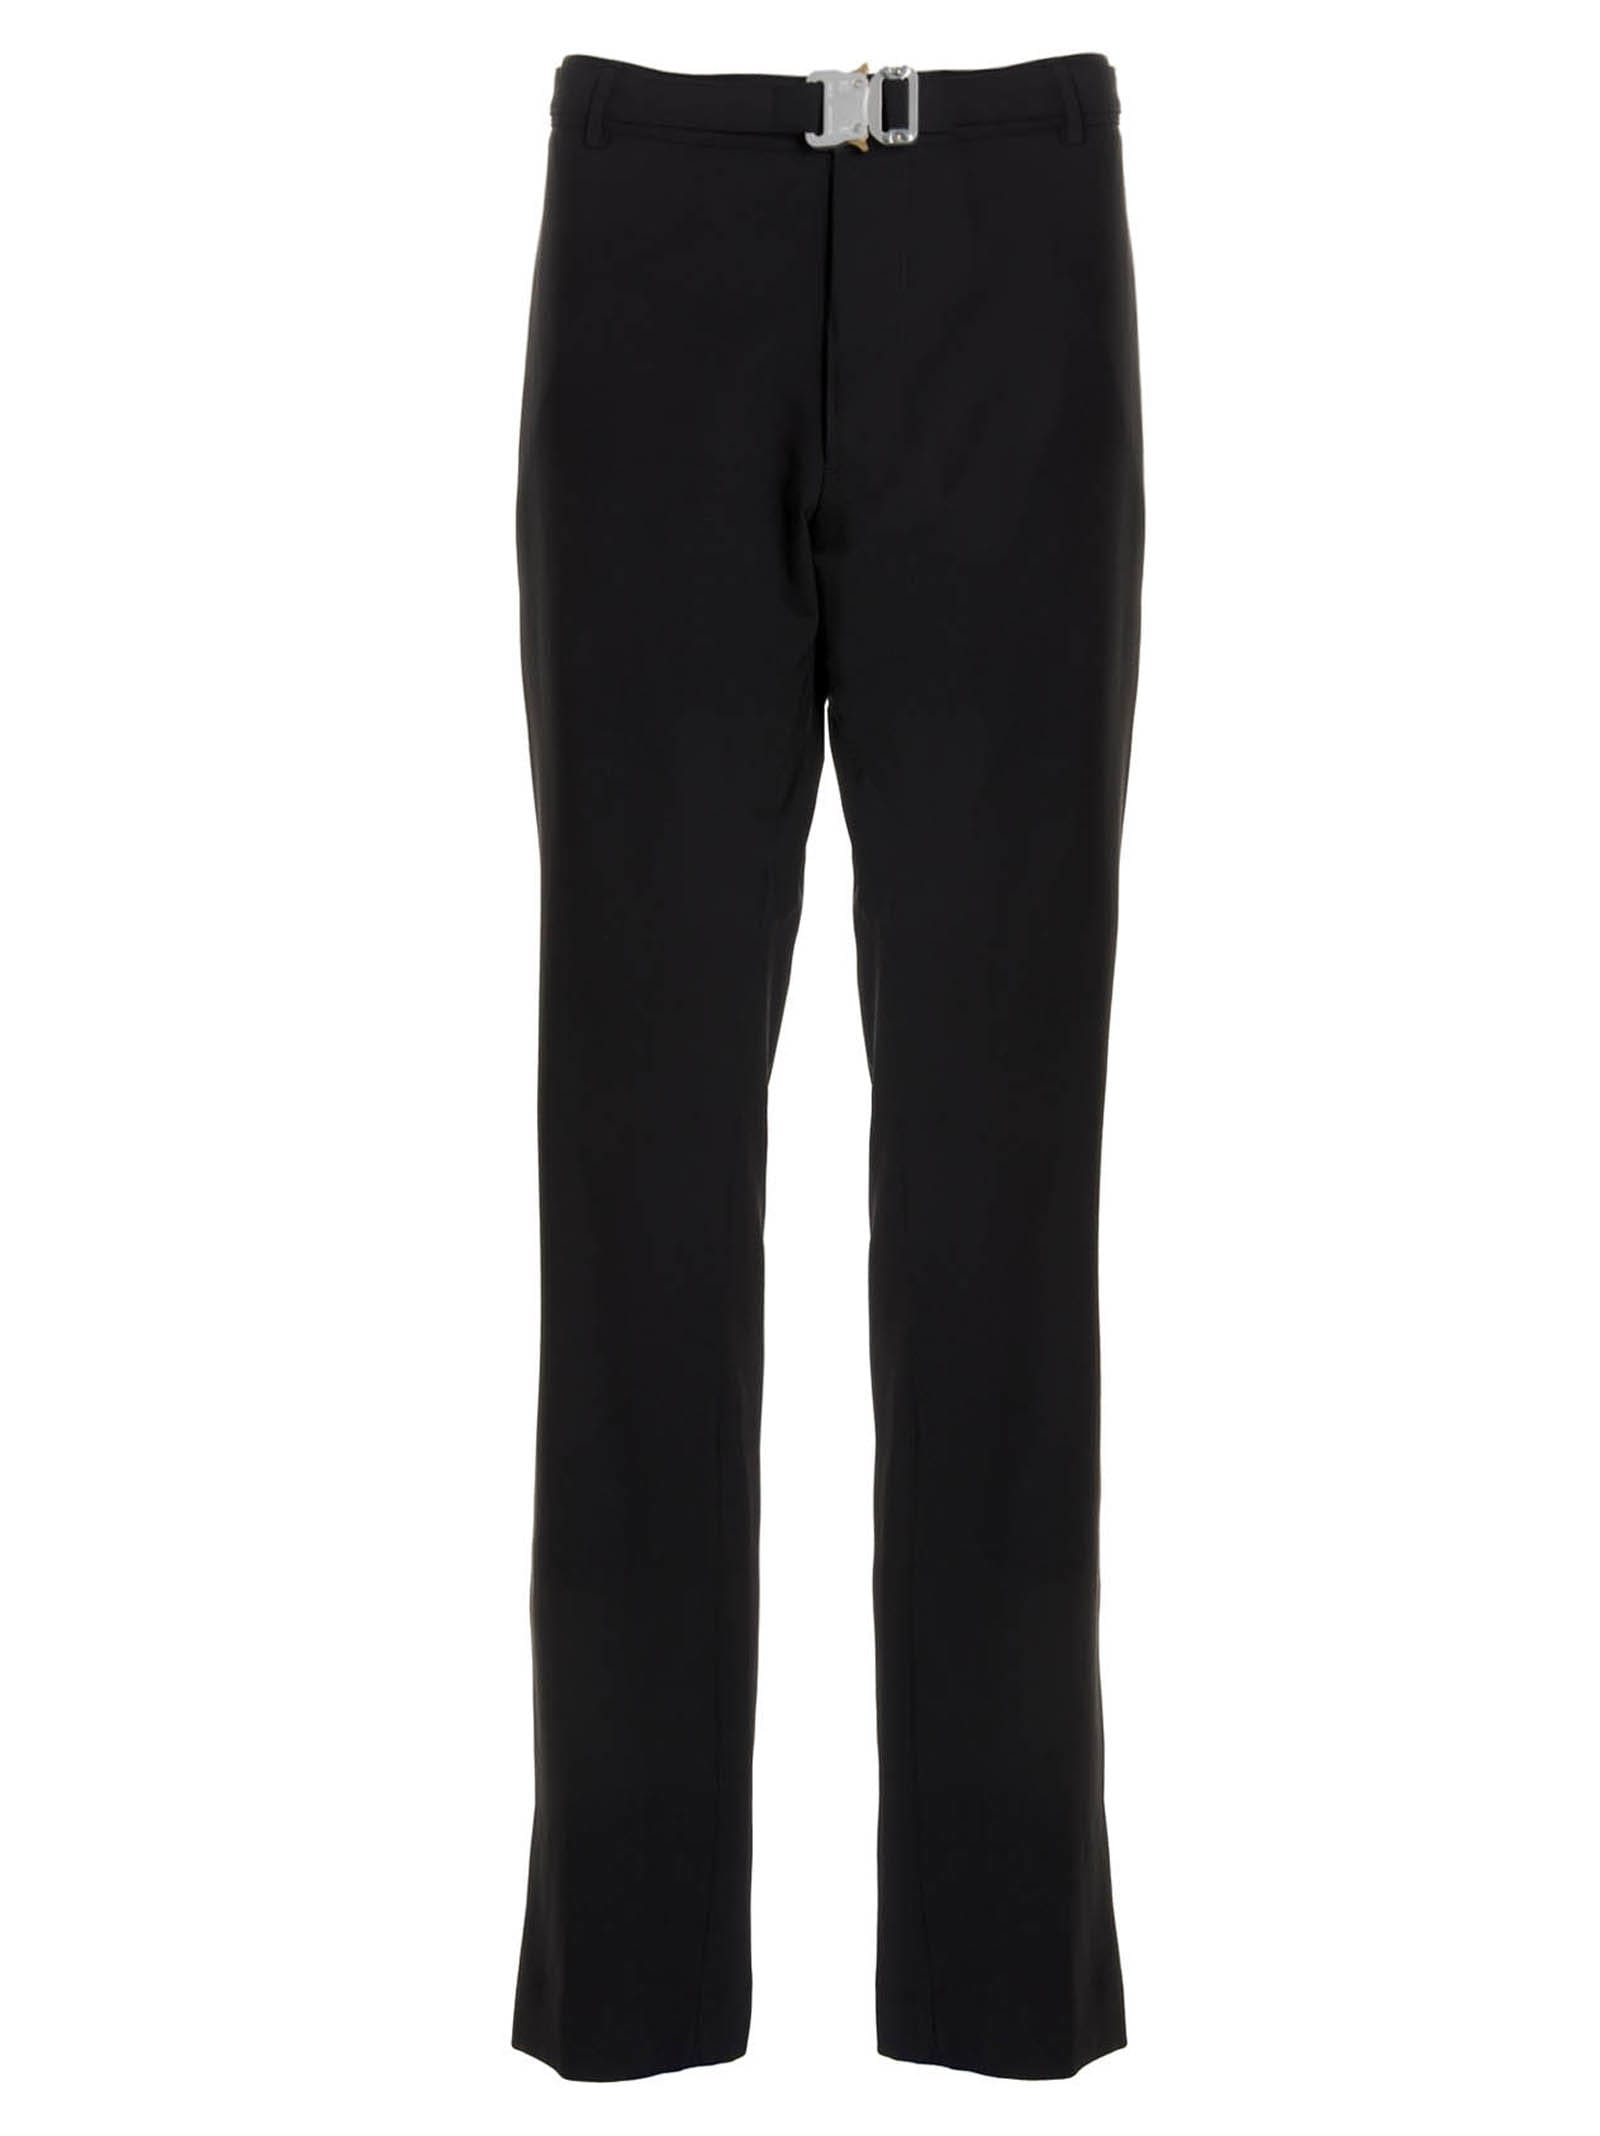 1017 ALYX 9SM Classic Trousers